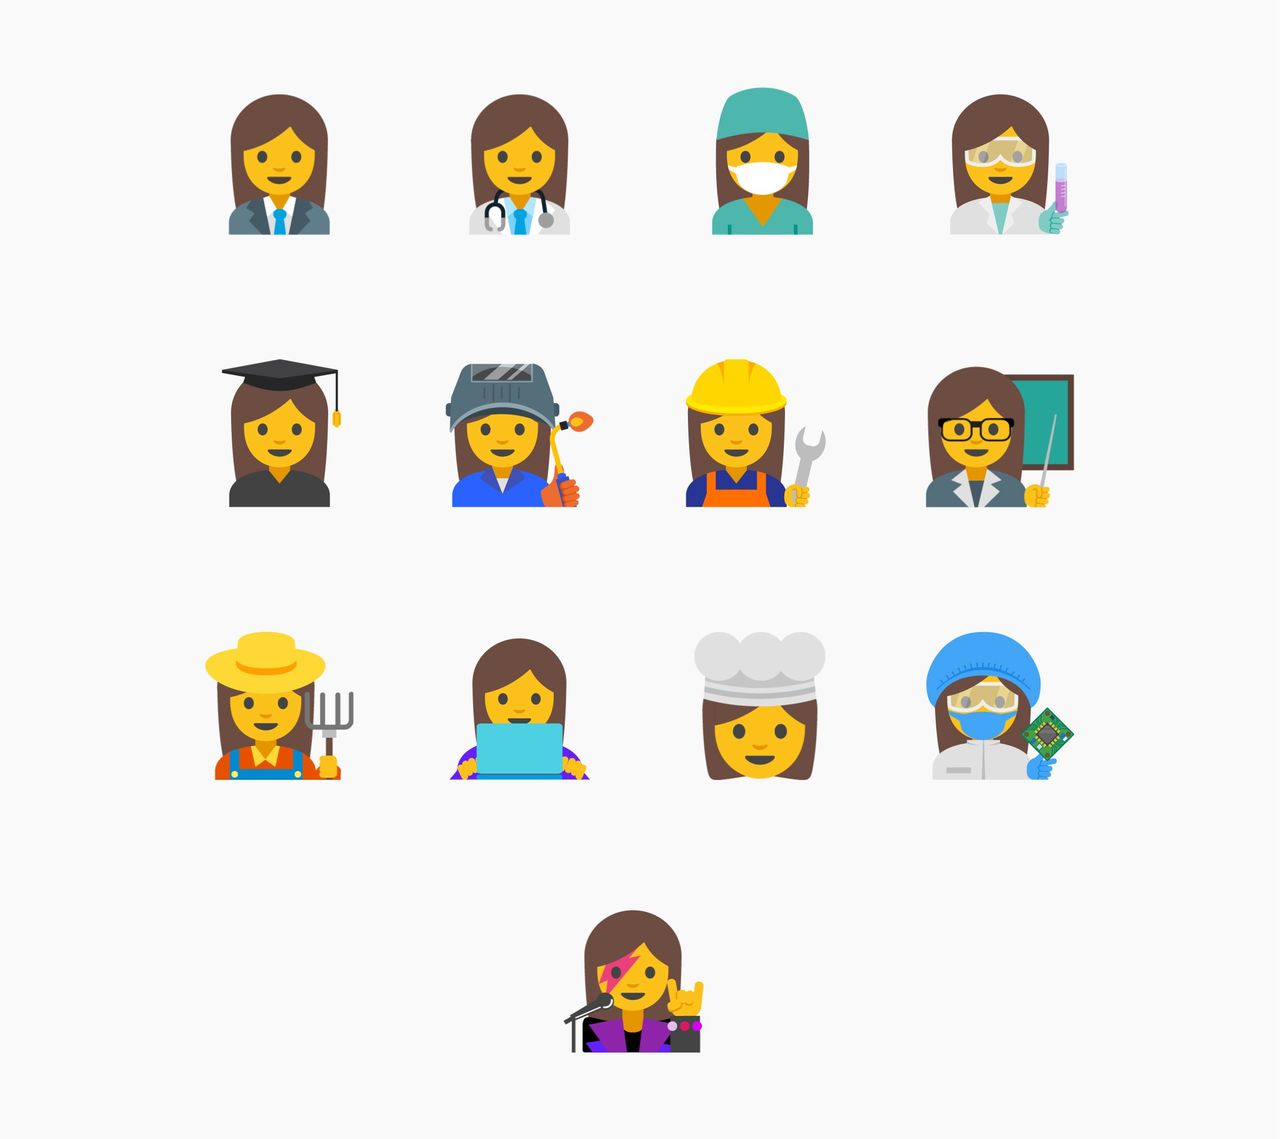 This image shows Google’s proposed female emojis.